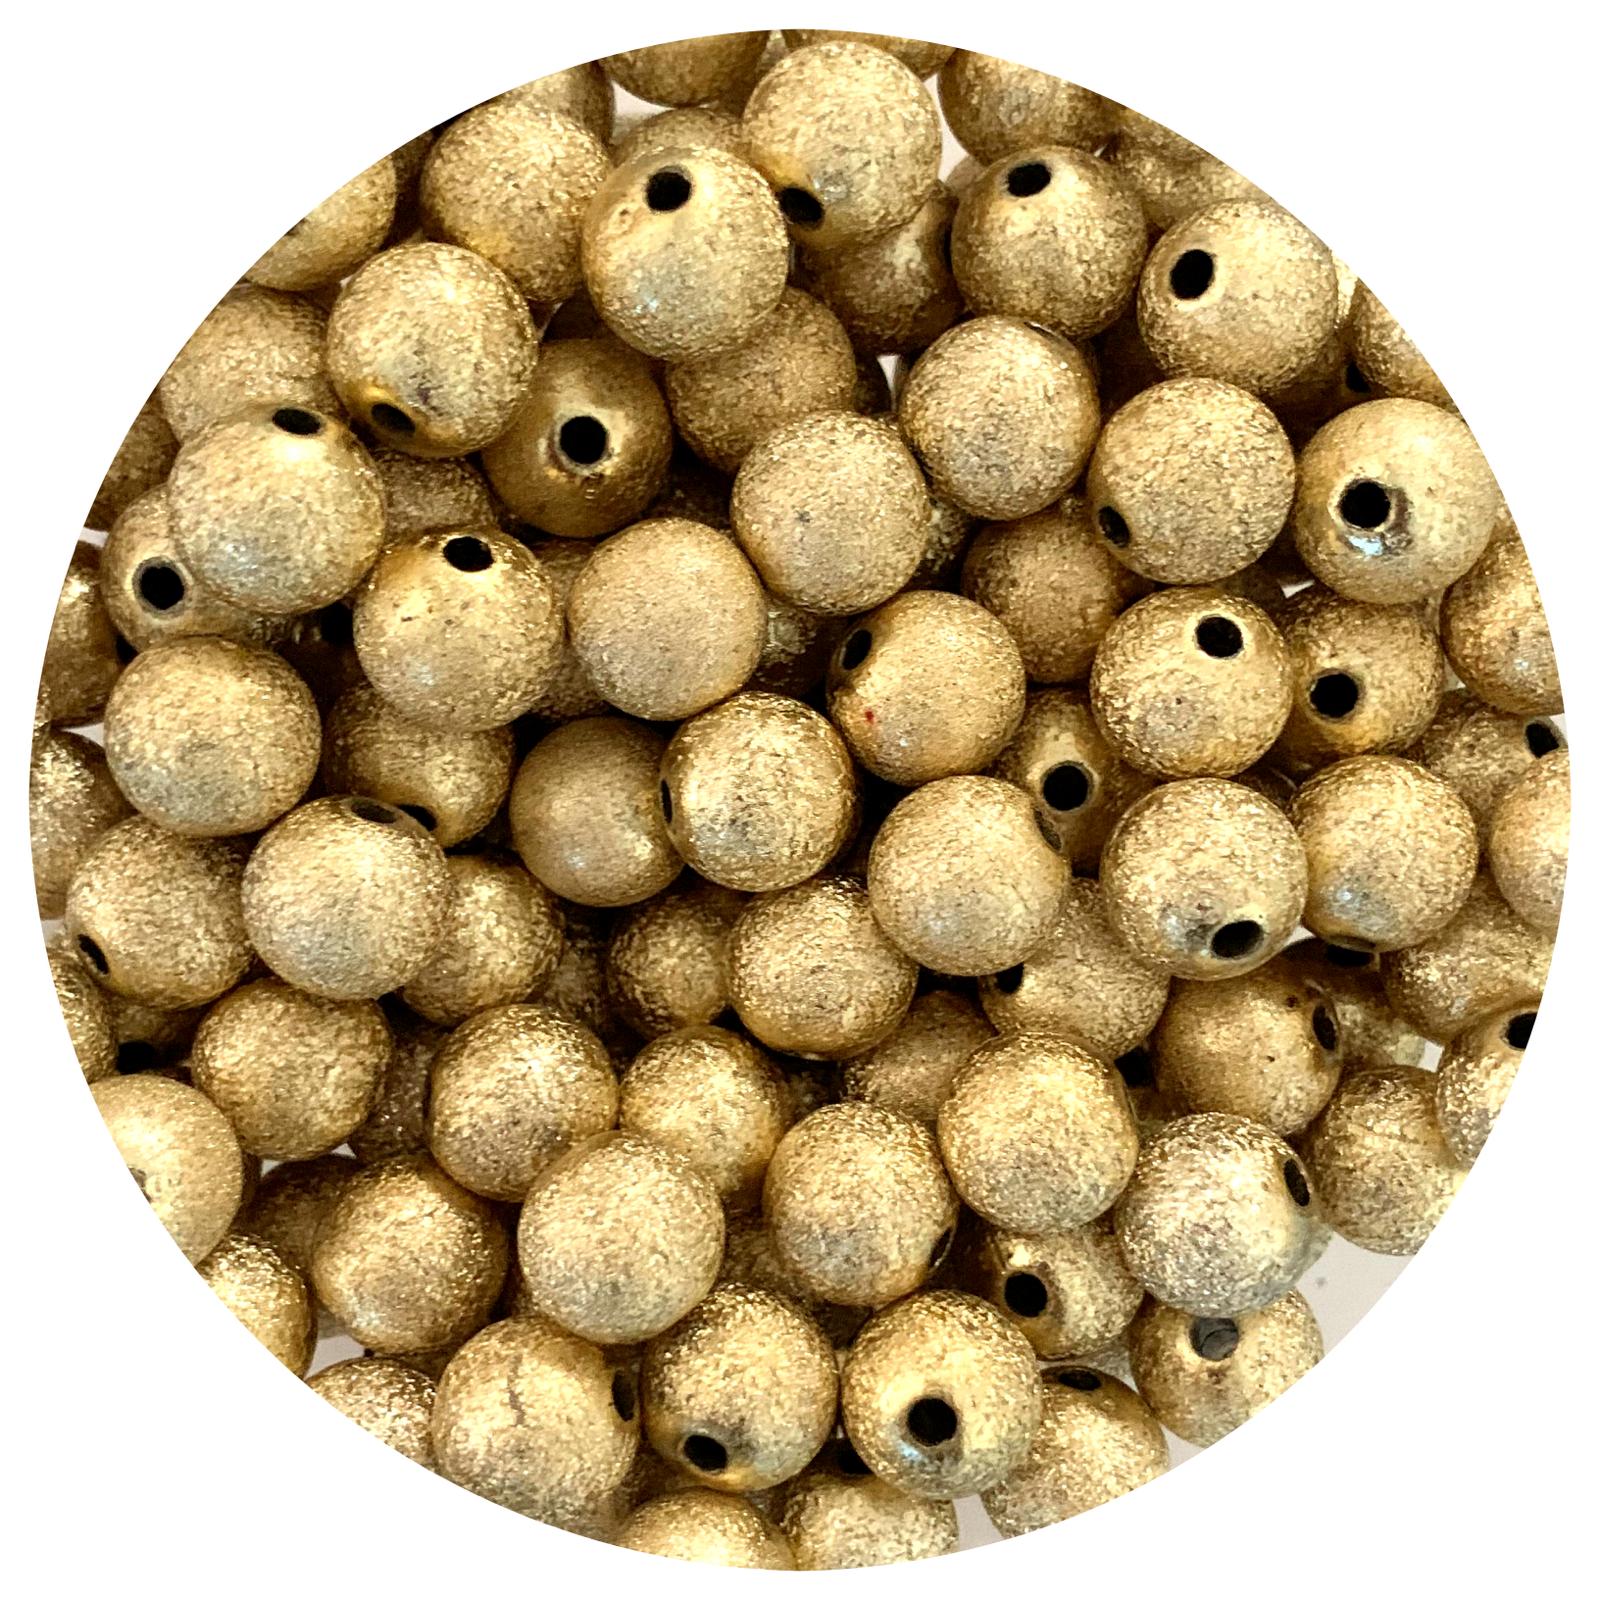 12mm Gold Stardust Round Acrylic Beads - 5 Beads